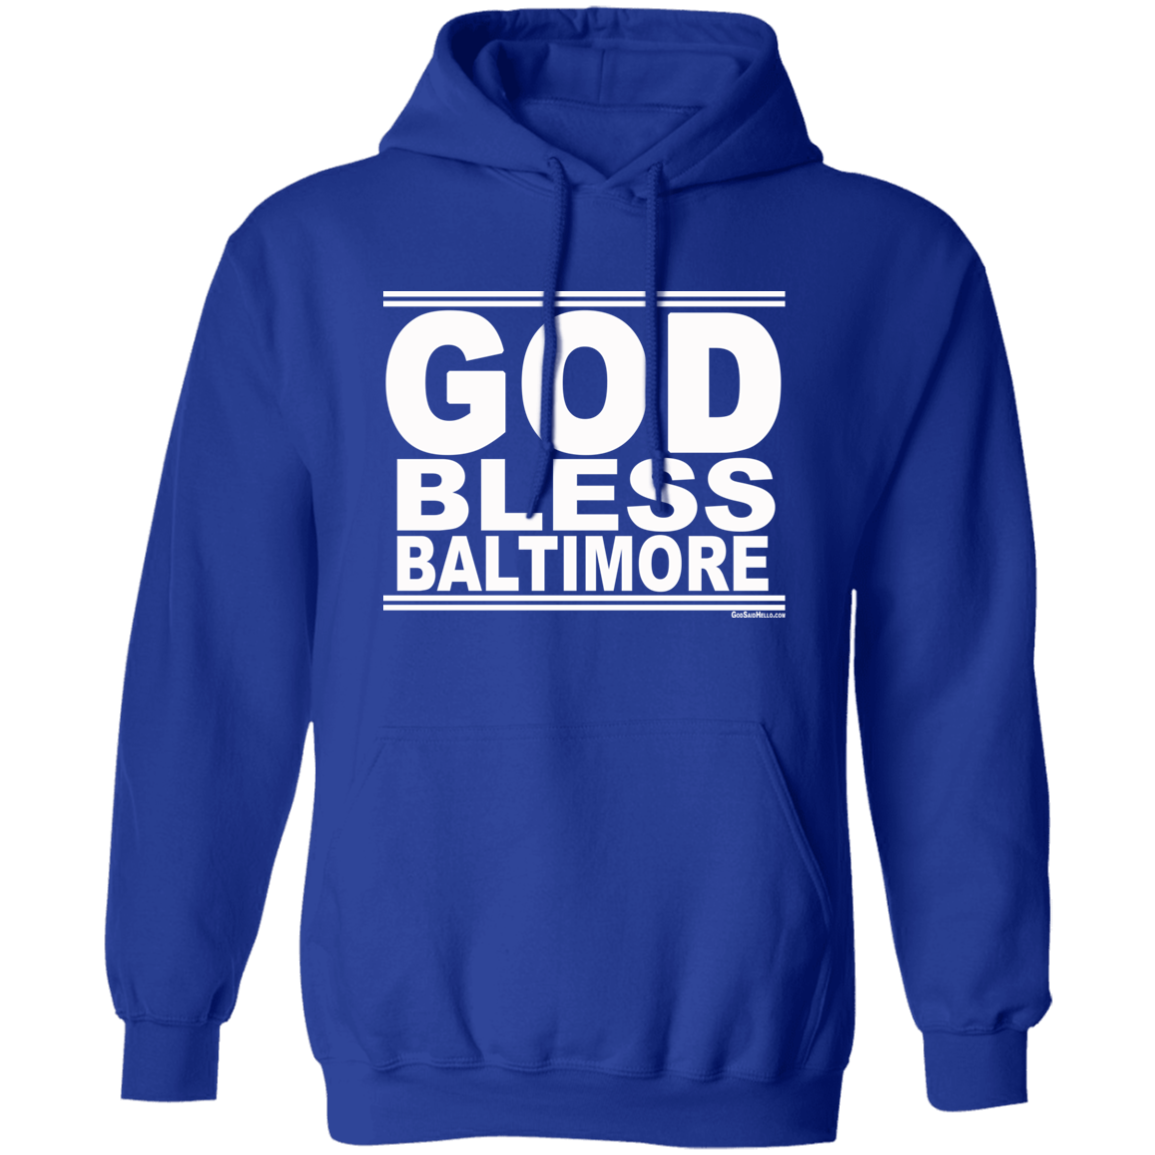 #GodBlessBaltimore - Pullover Hoodie